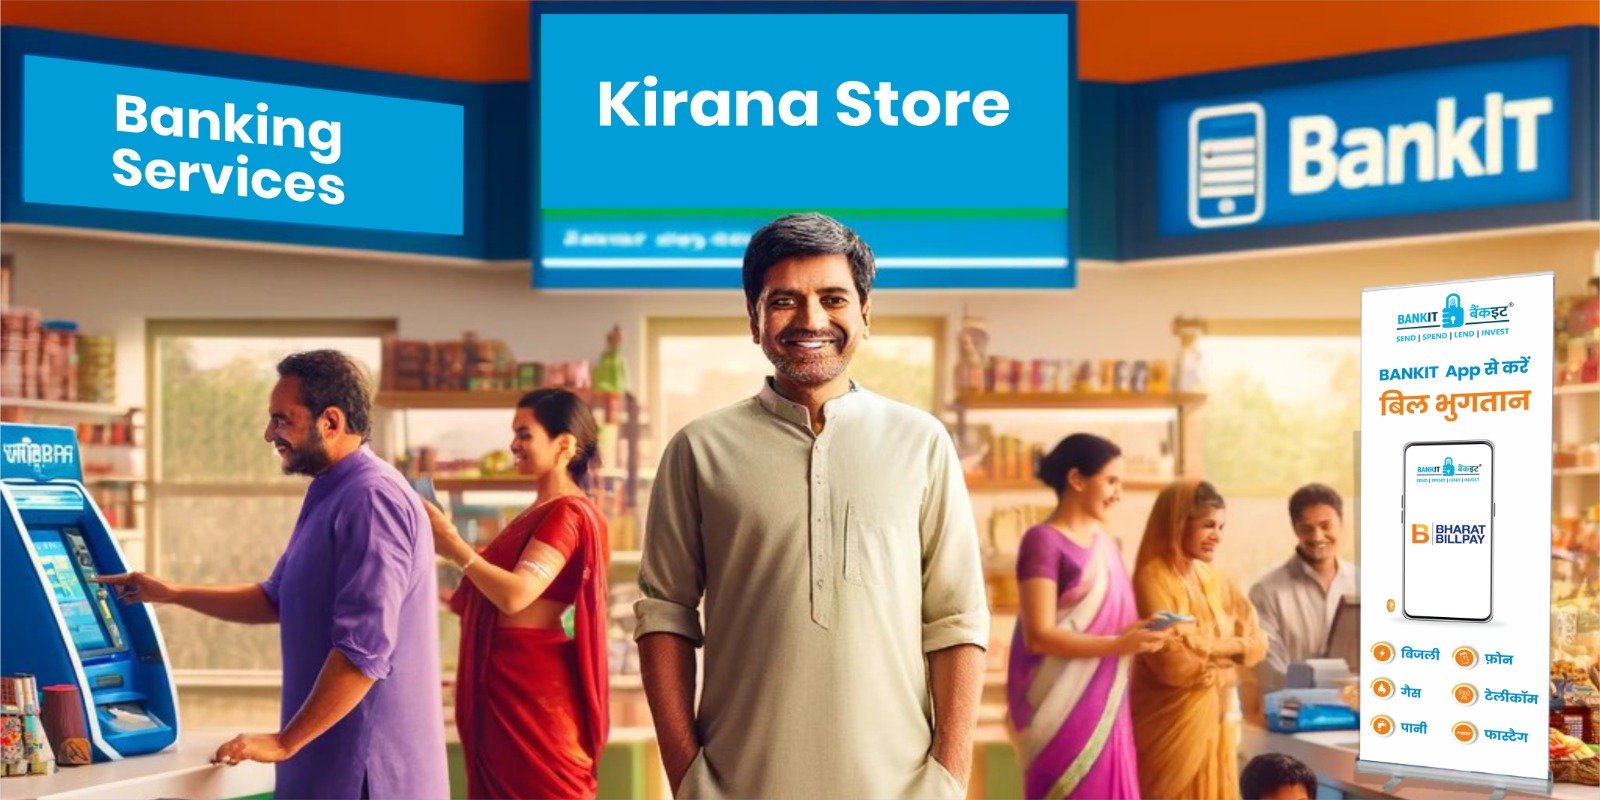 A BANKIT agent's journey from small shopkeeper to digital kirana store owner, showcasing the transformative power of digital banking services in local communities.